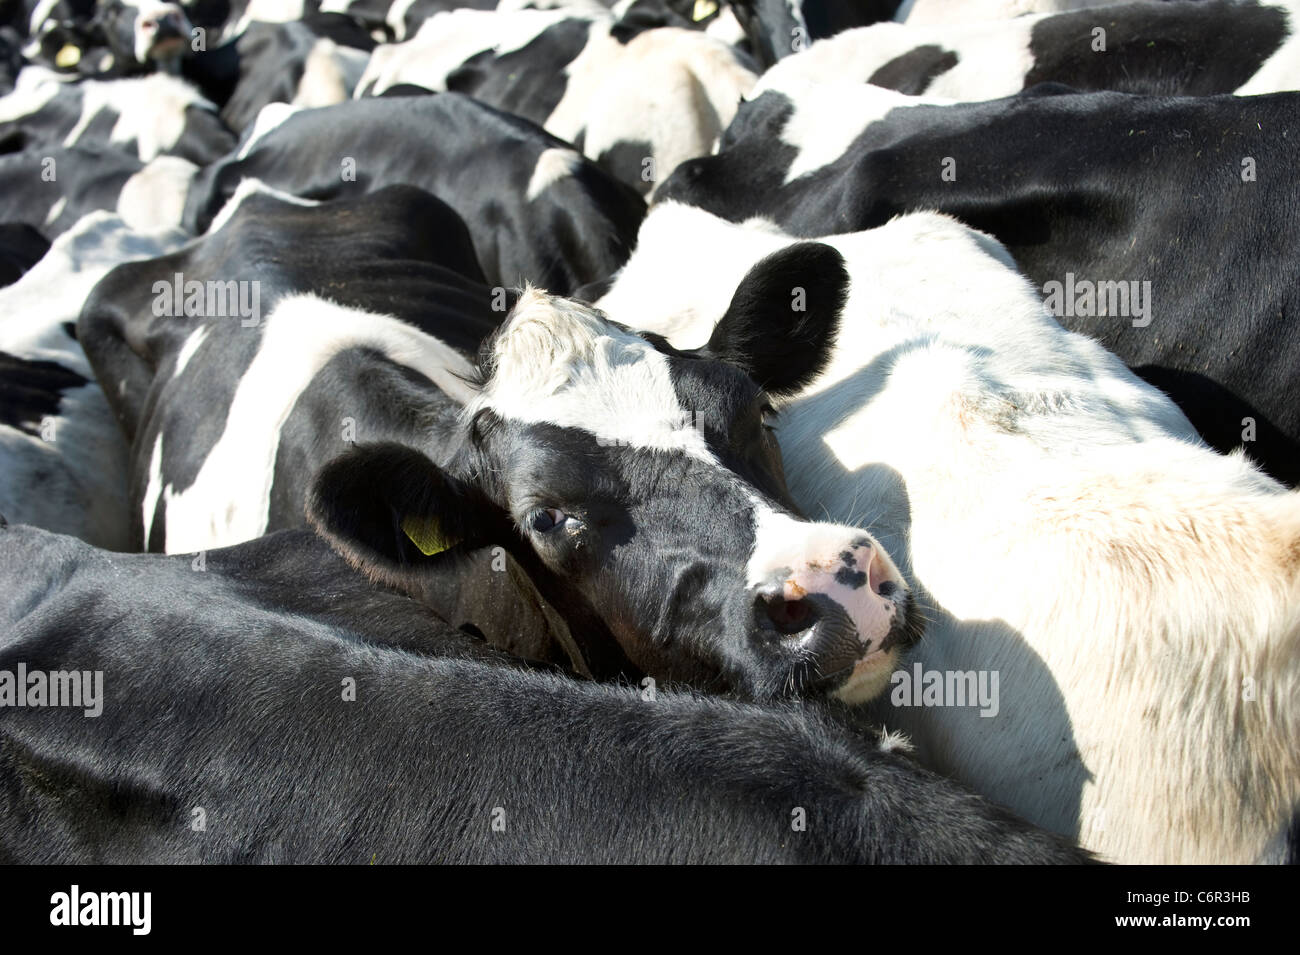 A tagged Black and White Friesian cow looks out from a tightly packed herd of milking cattle Stock Photo